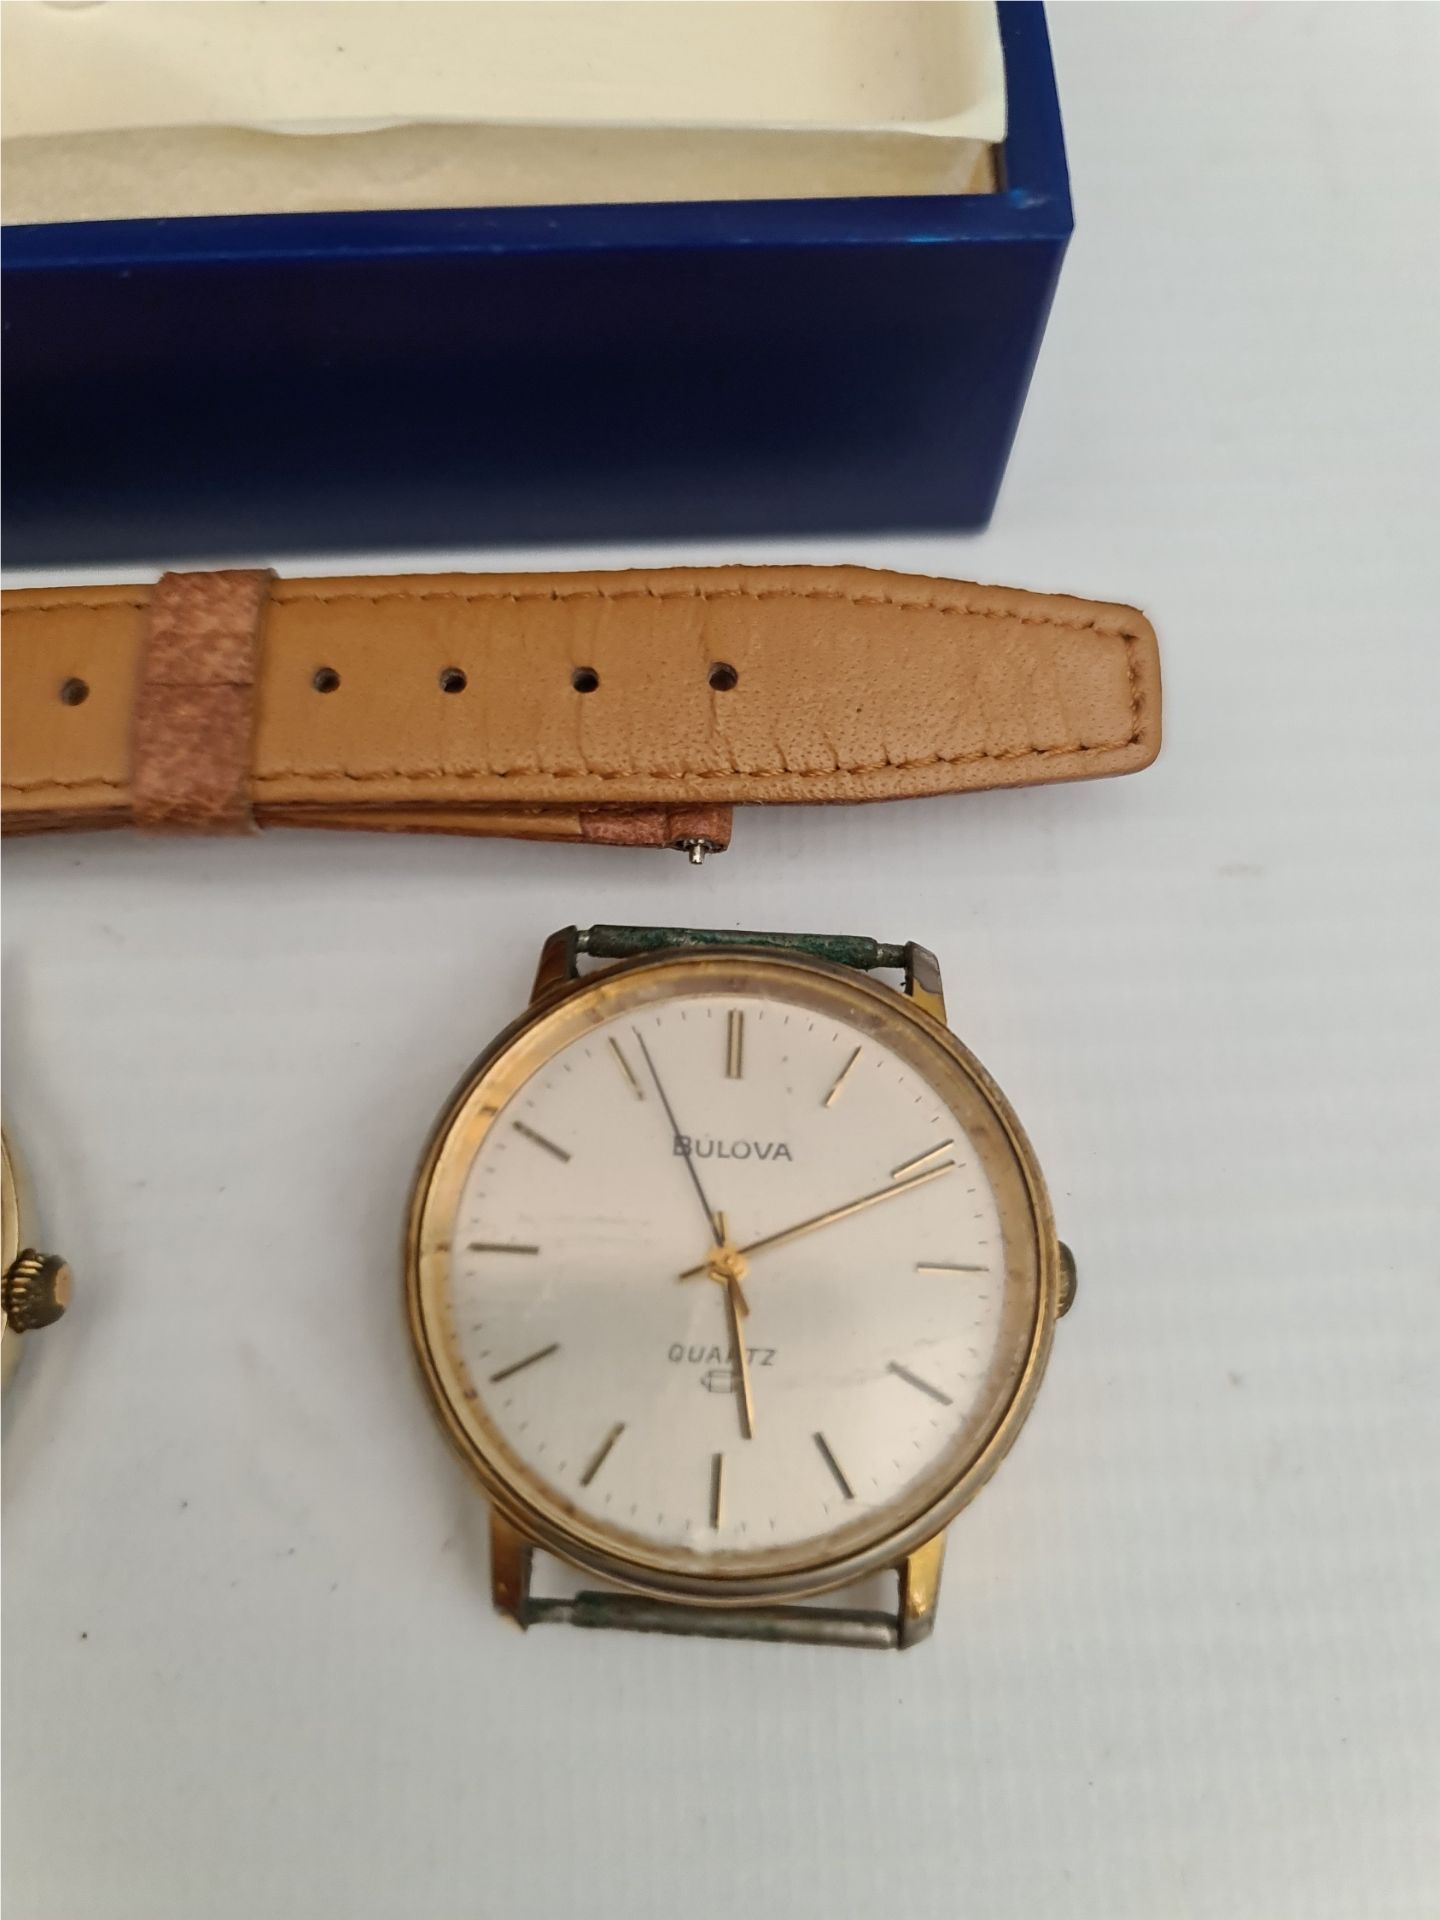 Vintage Wrist Watches Includes Bulova Quartz both need a service - Image 2 of 3